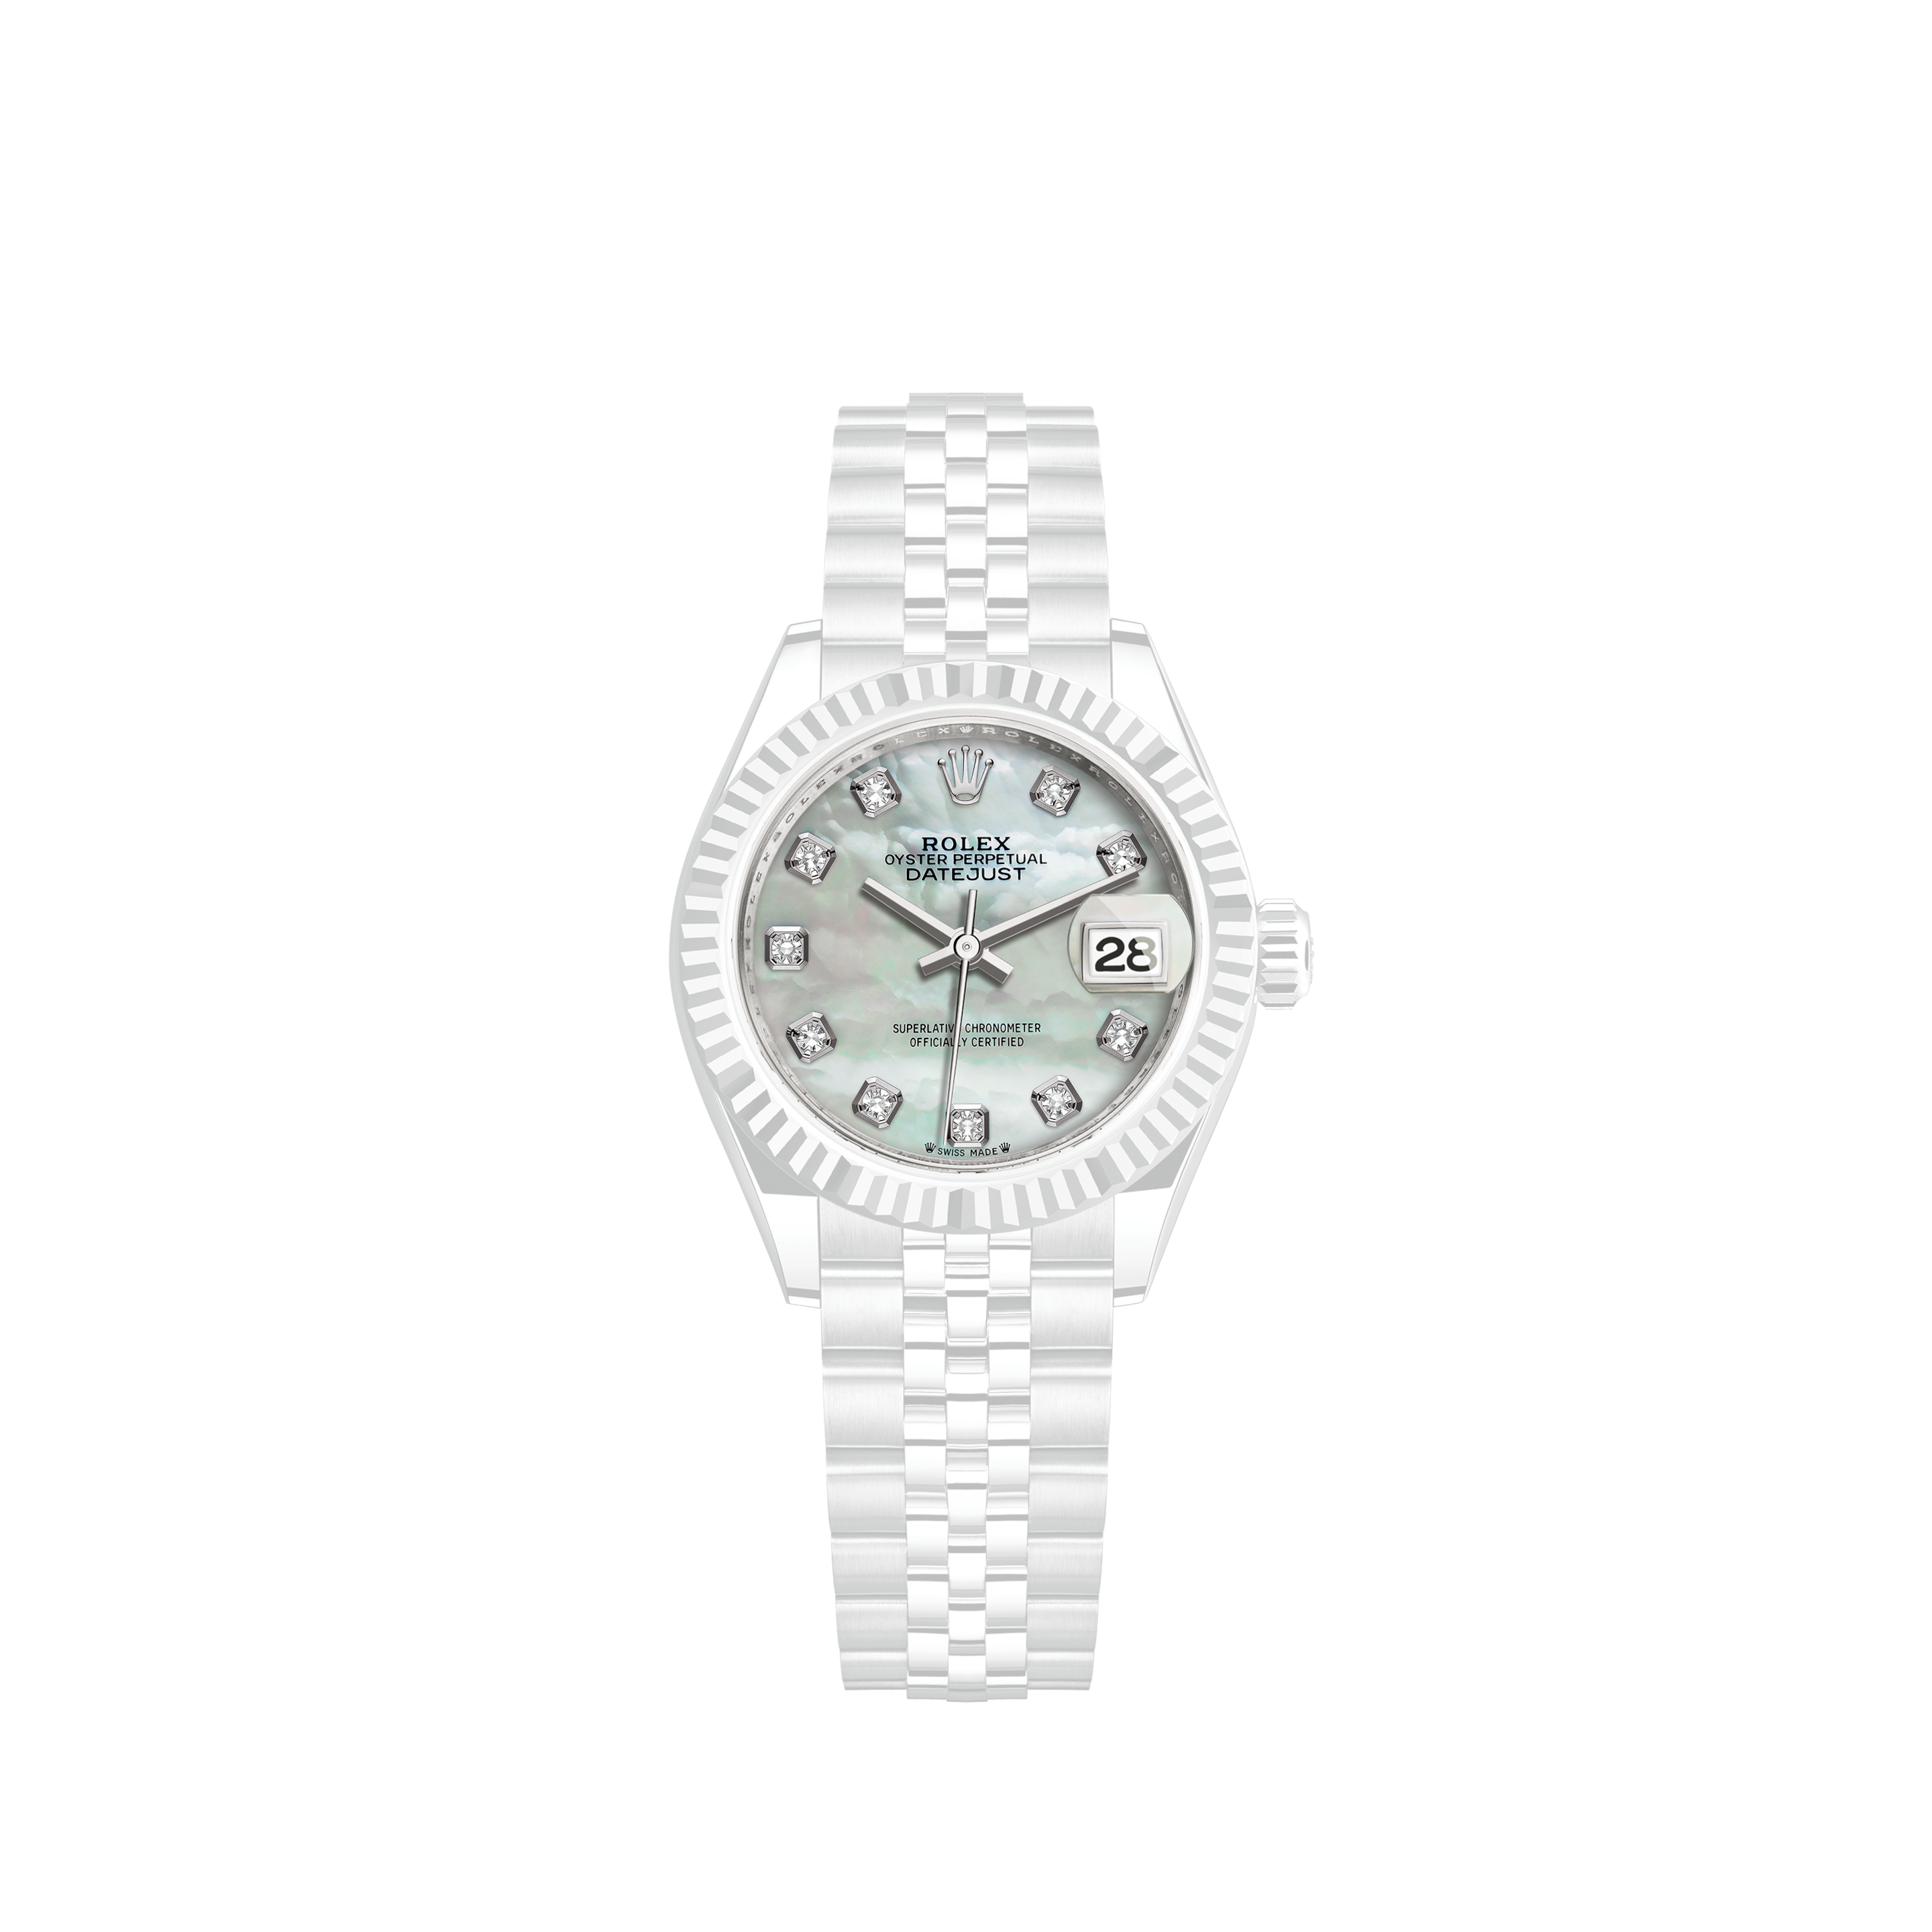 Rolex Datejust Two-tone White MOP Emerald Dial Diamond Bezel 36mm-QuicksetRolex Datejust Two-tone White MOP Sapphire Dial Diamond Sapphire Bezel 36mm-Quickset